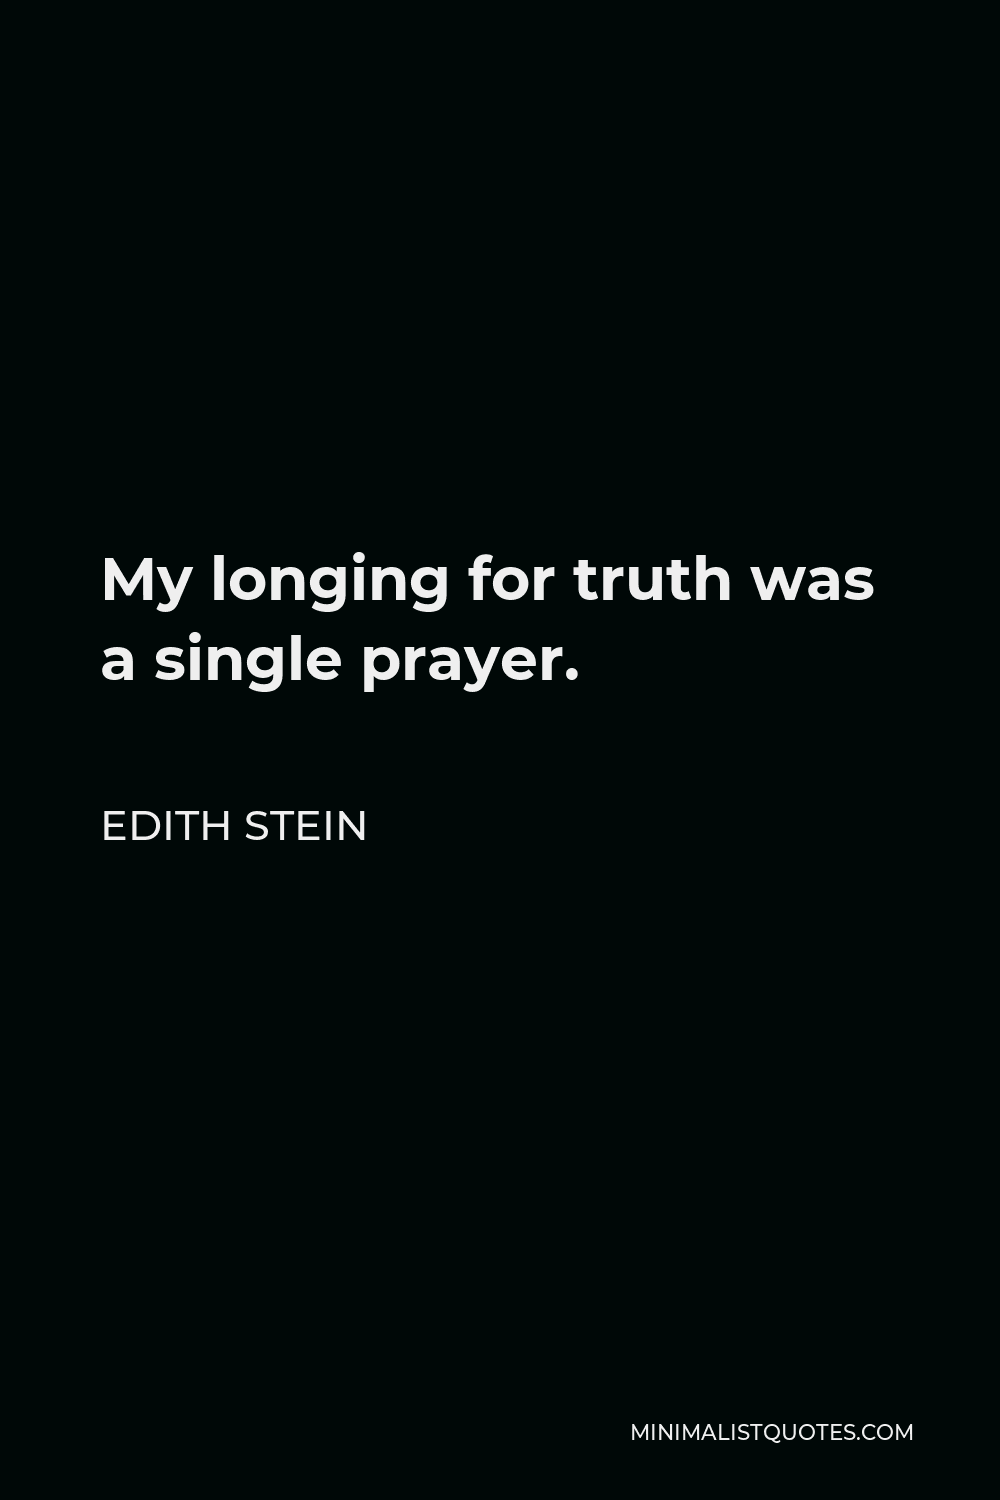 Edith Stein Quote - My longing for truth was a single prayer.